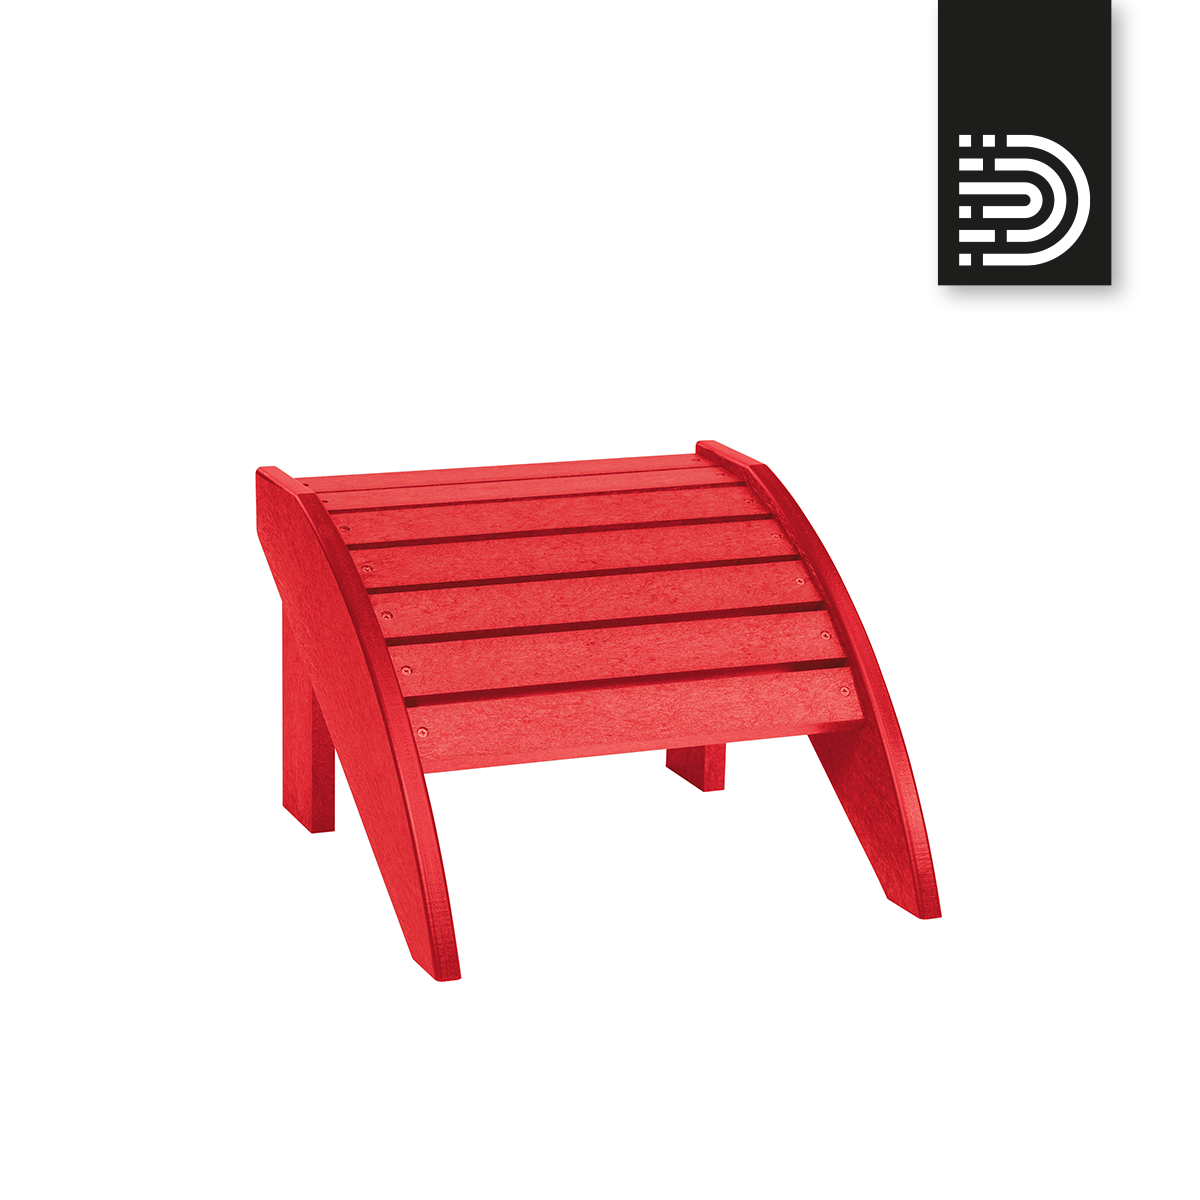 F01 Footstool - red 01